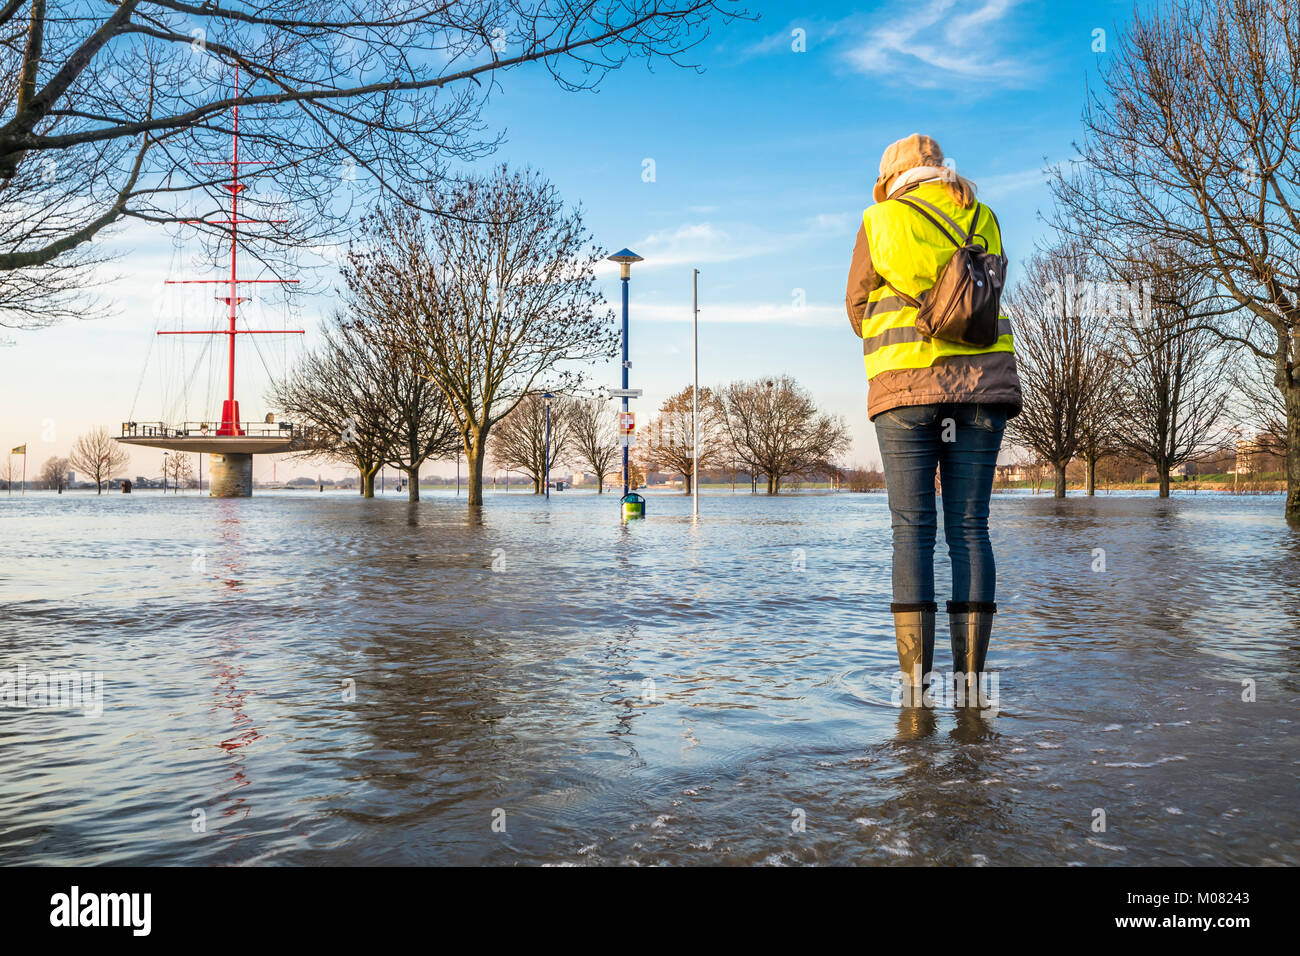 Lady standing in flooded street in wellys Stock Photo